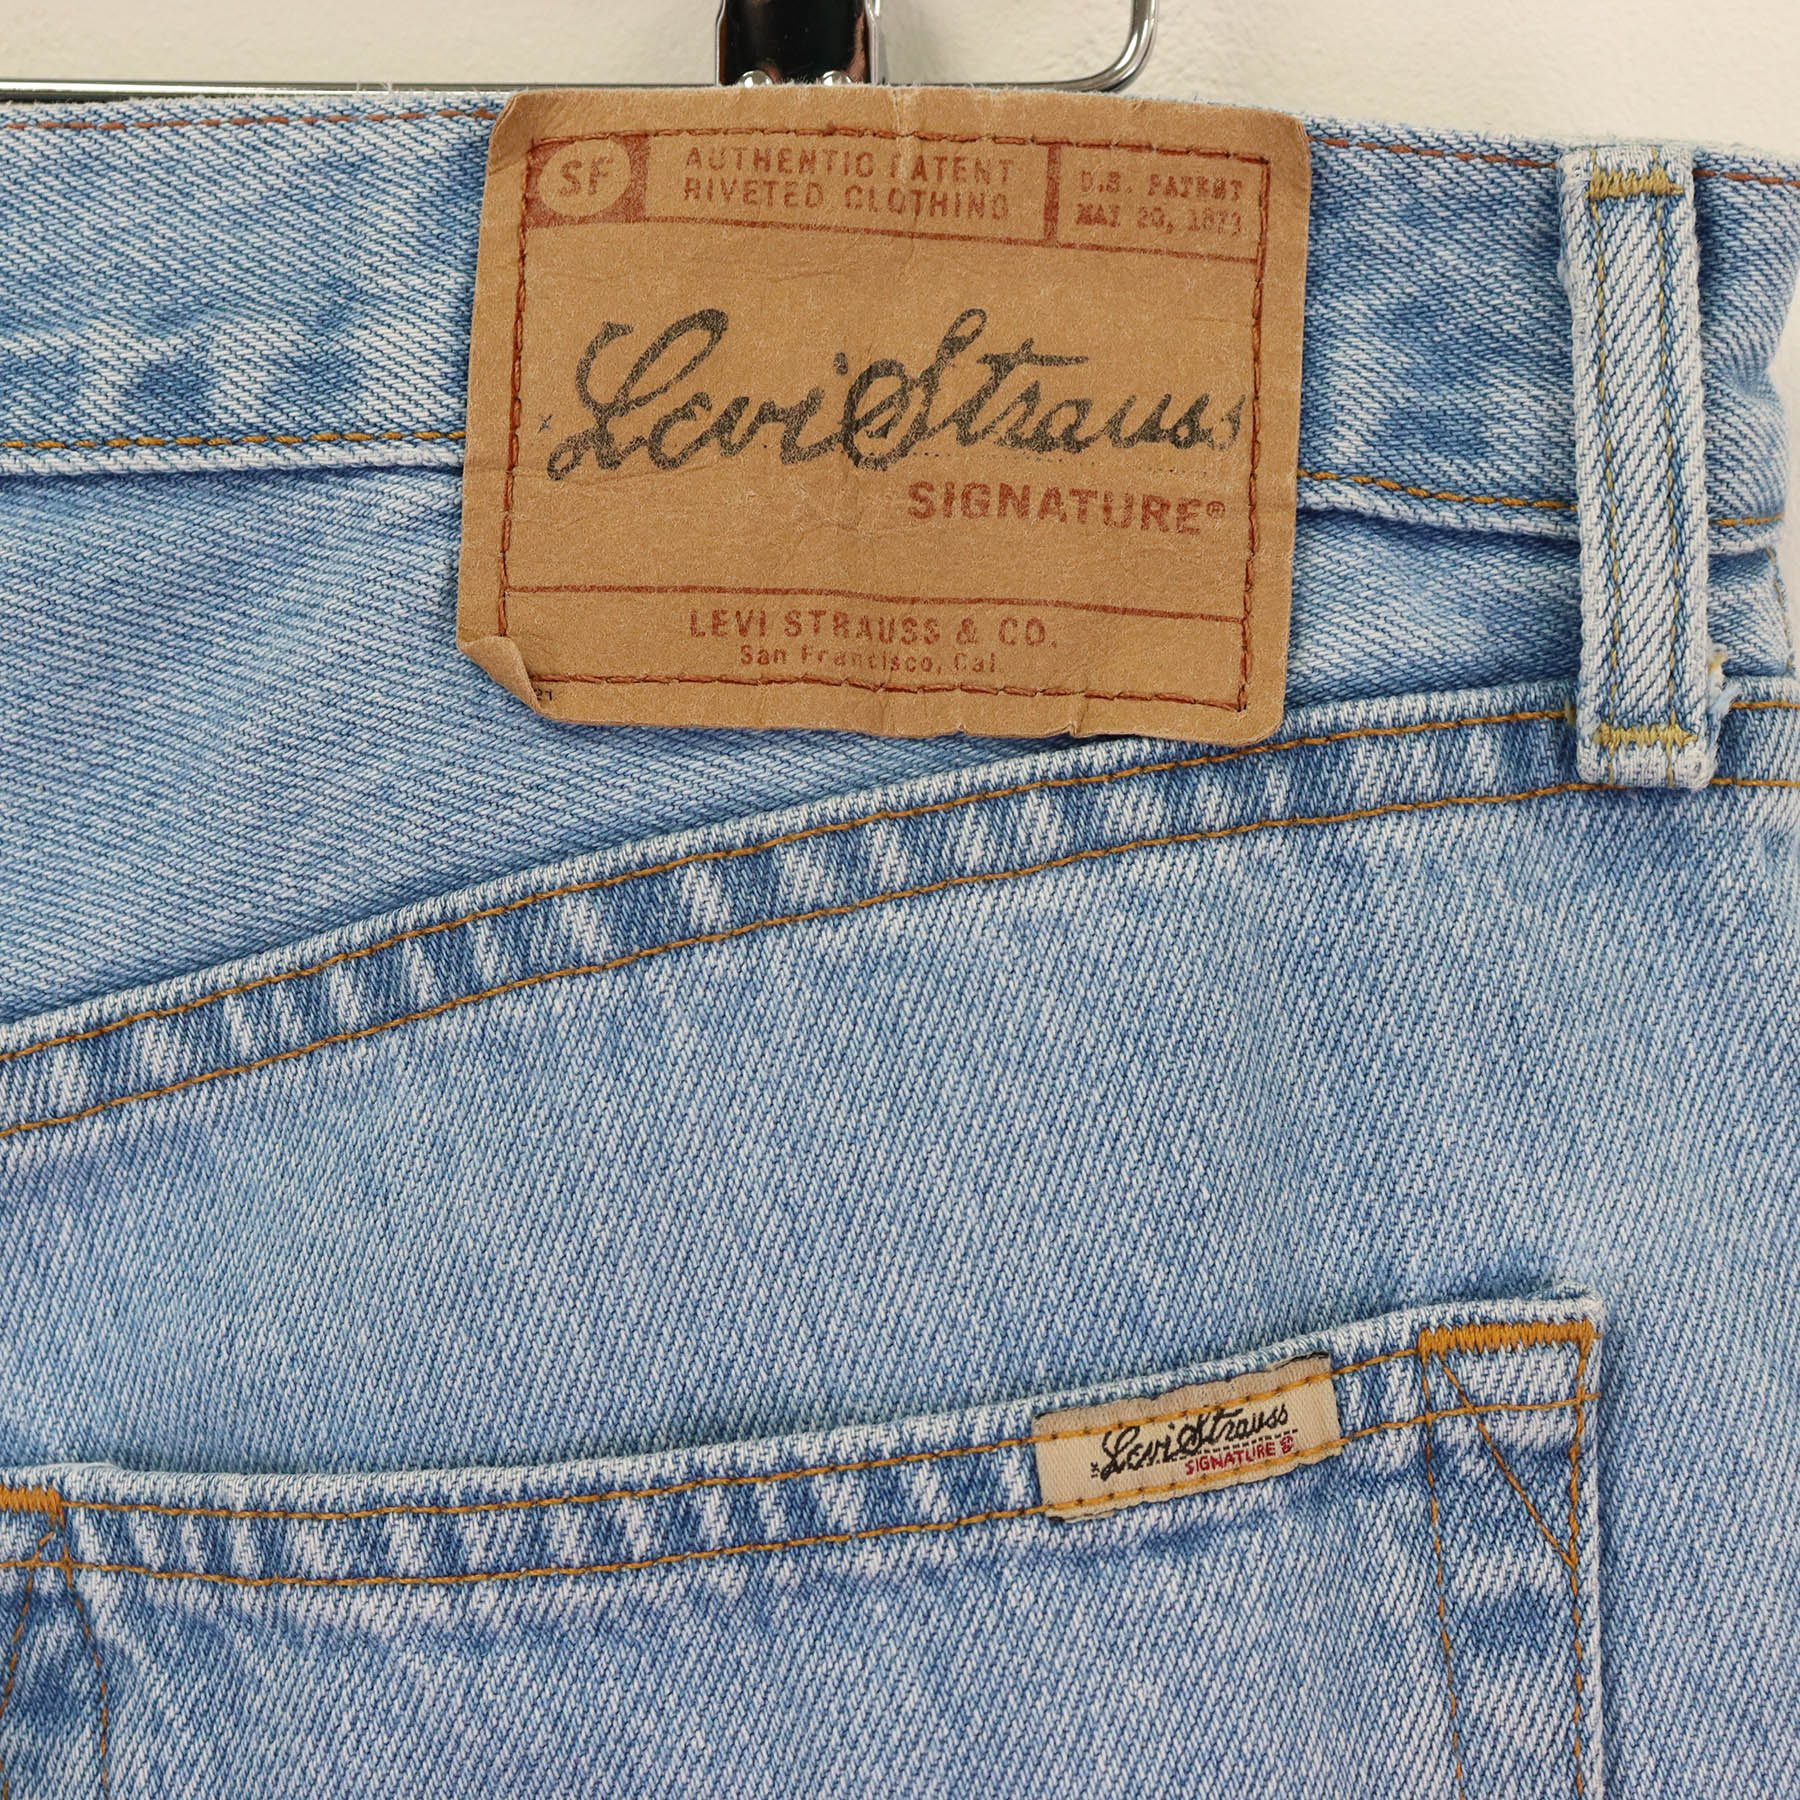 Levi's Signature Relaxed Fit Jeans W36 L30 – Sheanies Vintage